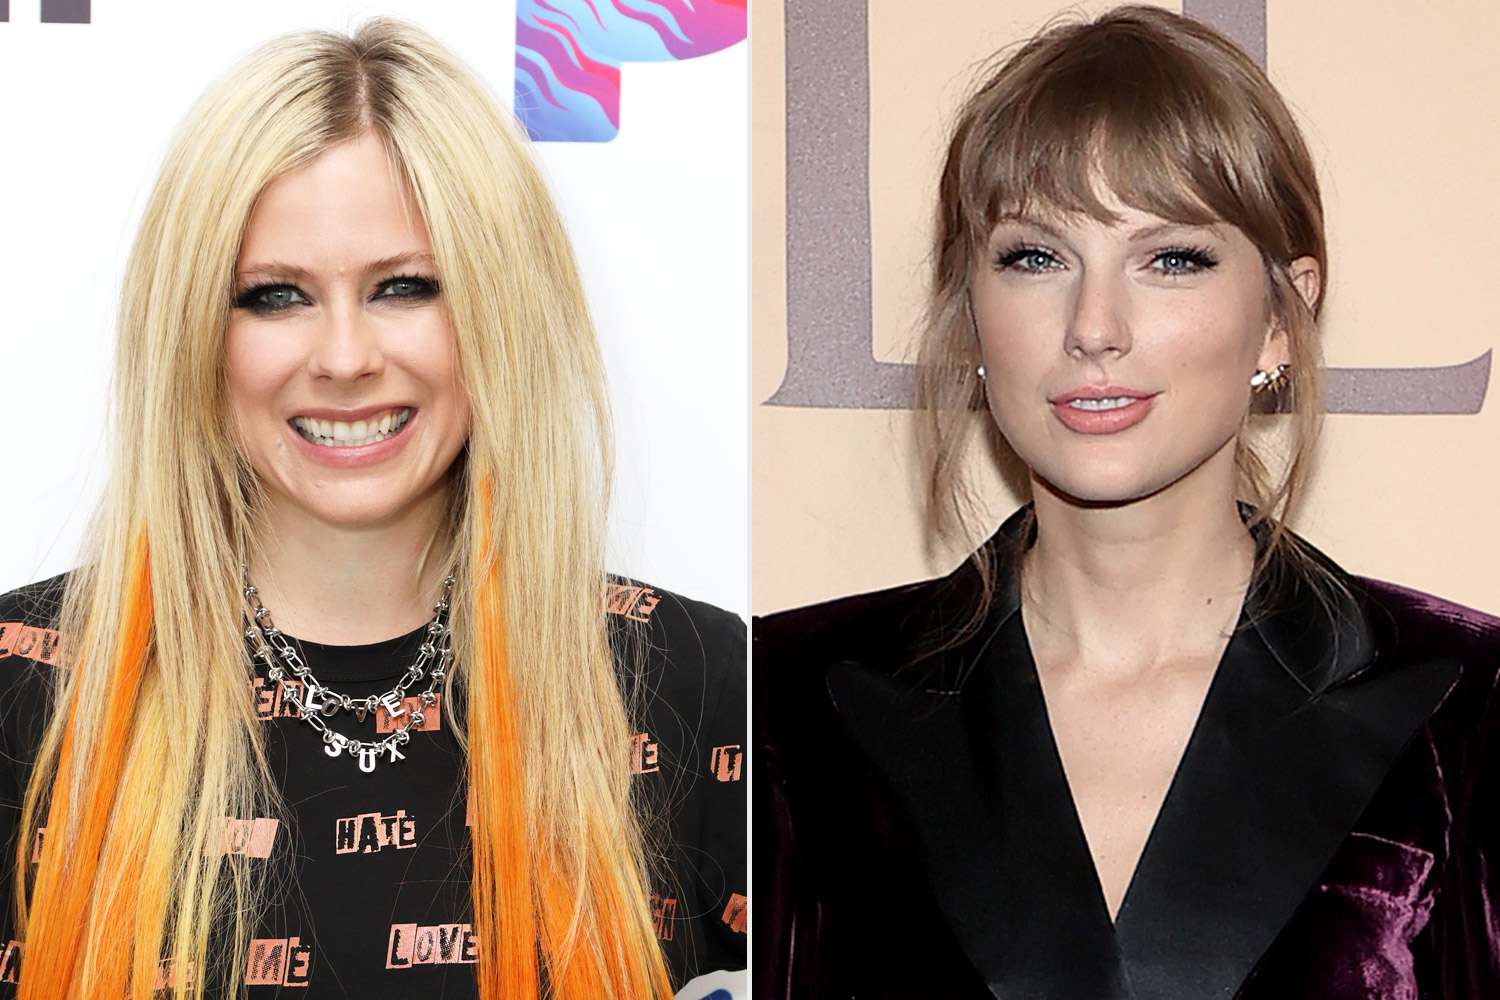 Avril Lavigne Says Taylor Swift ‘Totally Made My Day’ When She Sent Her Flowers Following Album Release